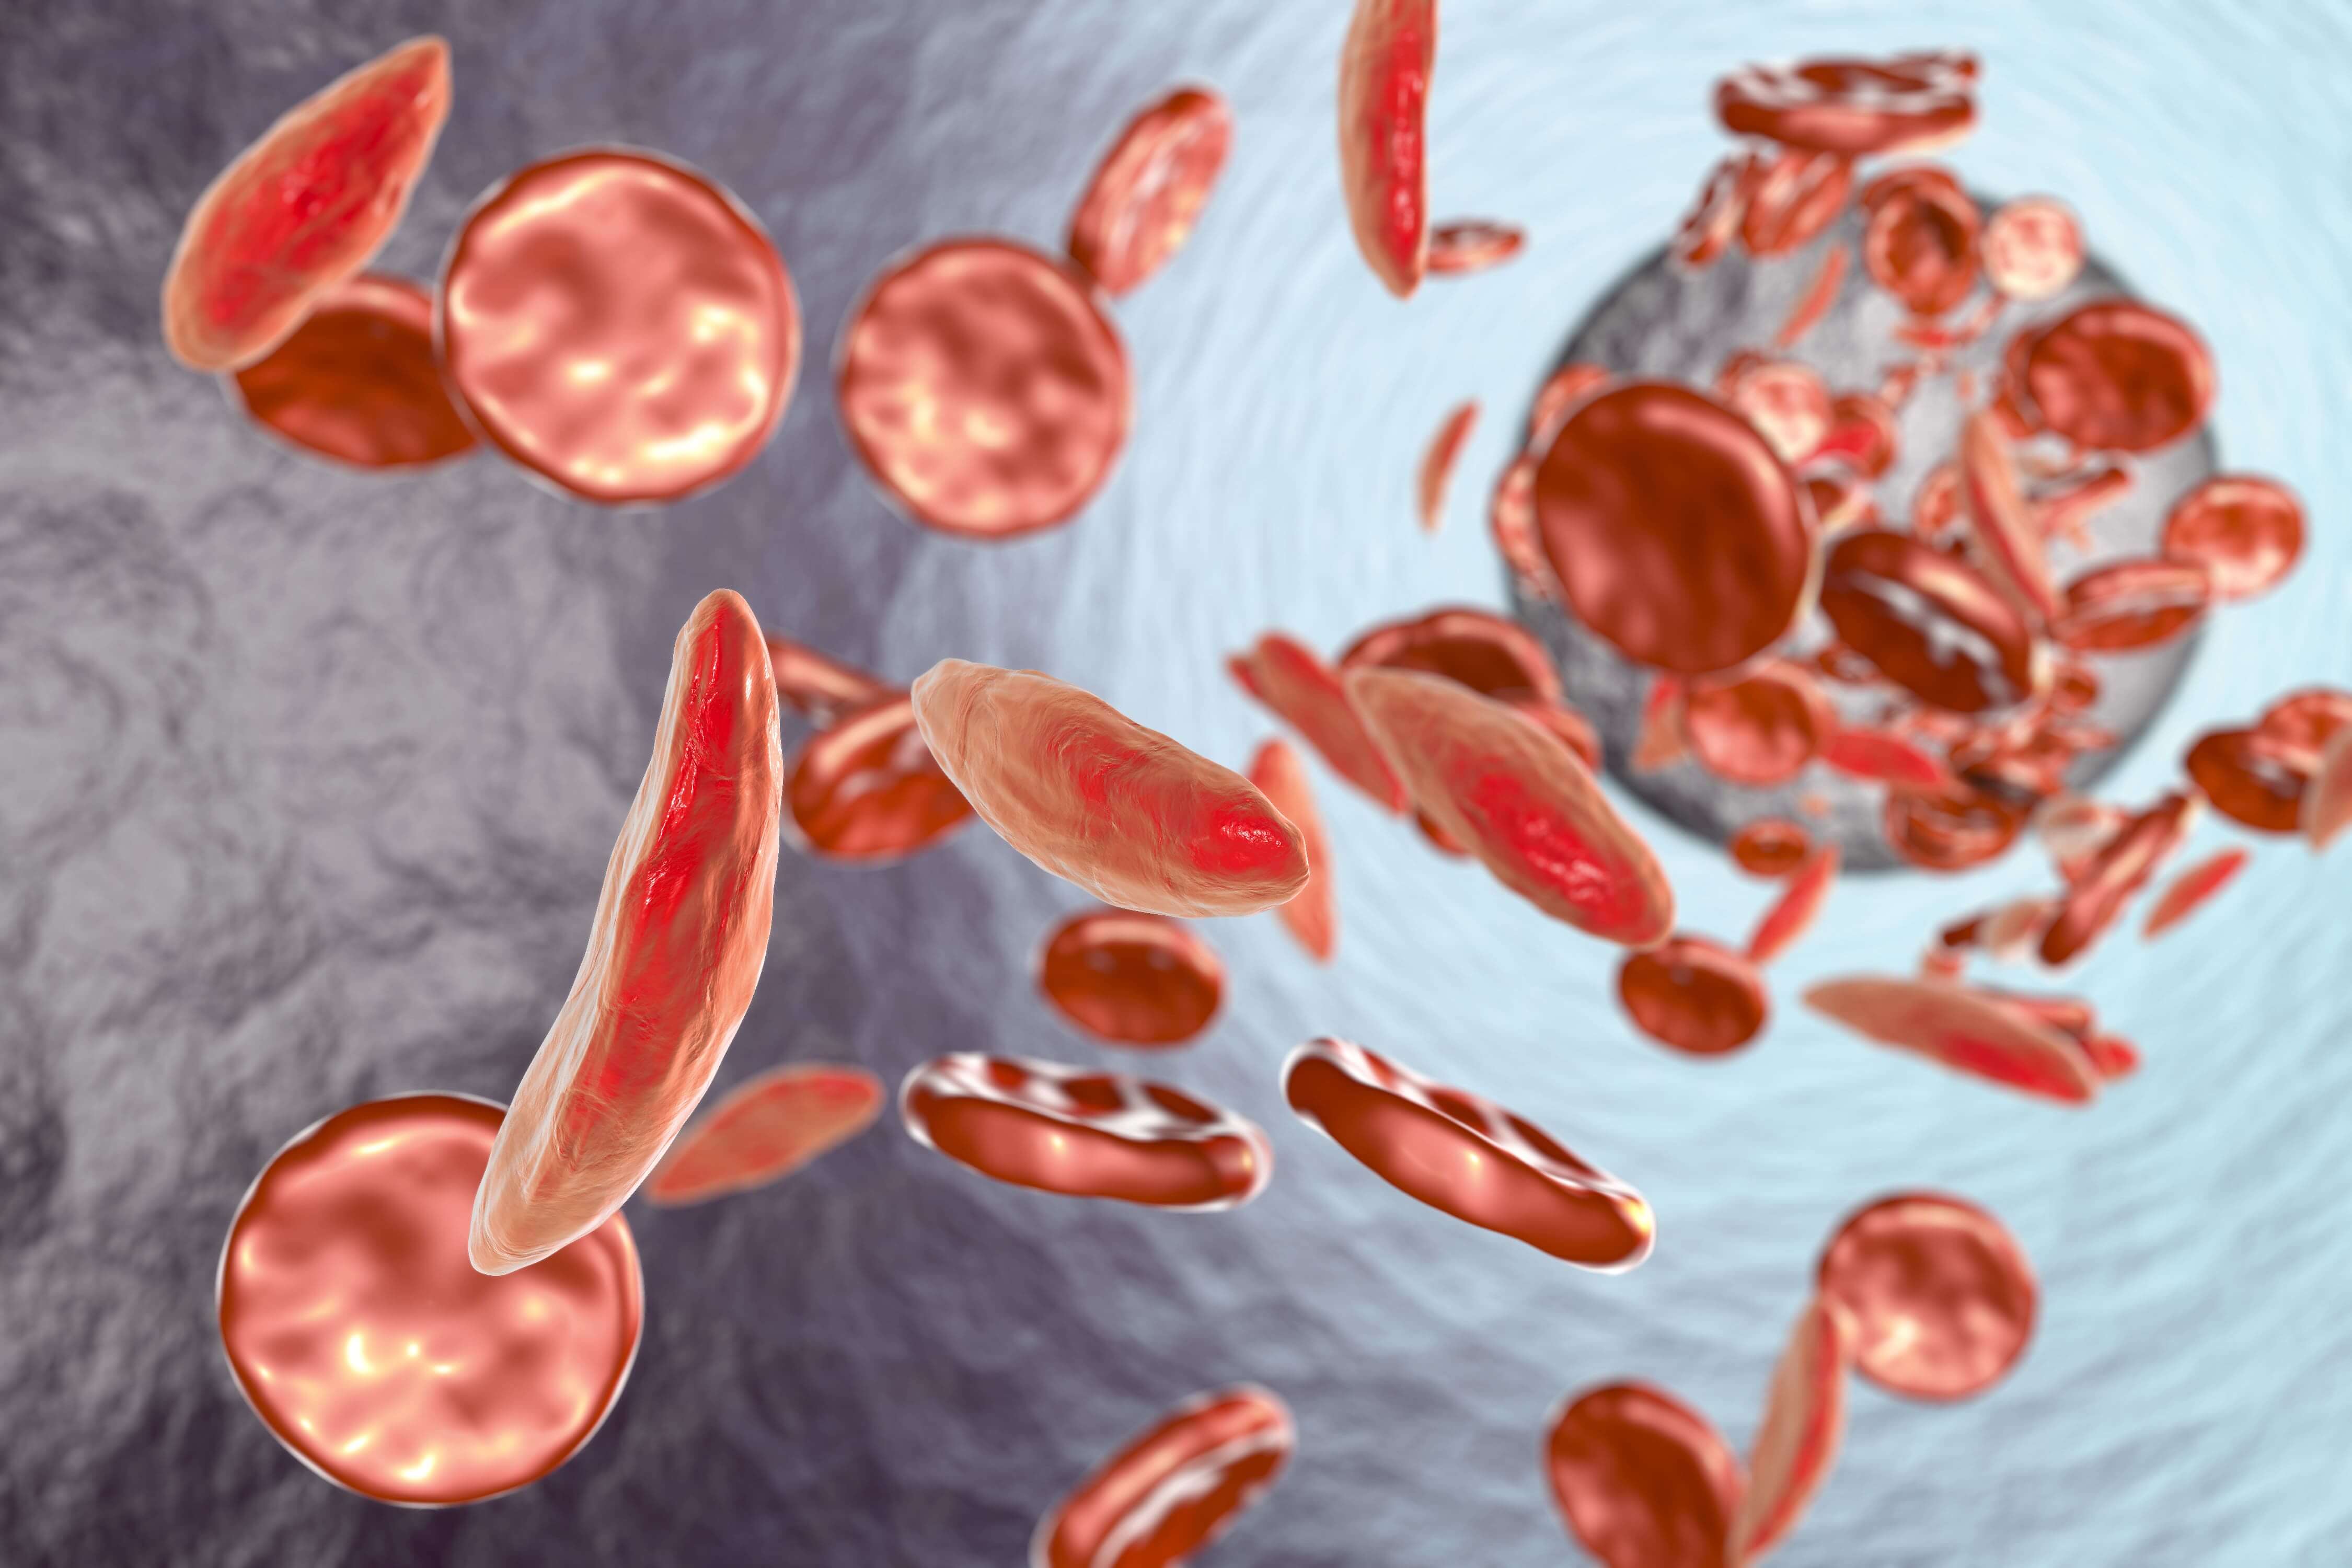 Possible Gene Therapy Cures for Sickle Cell Disease Arrive